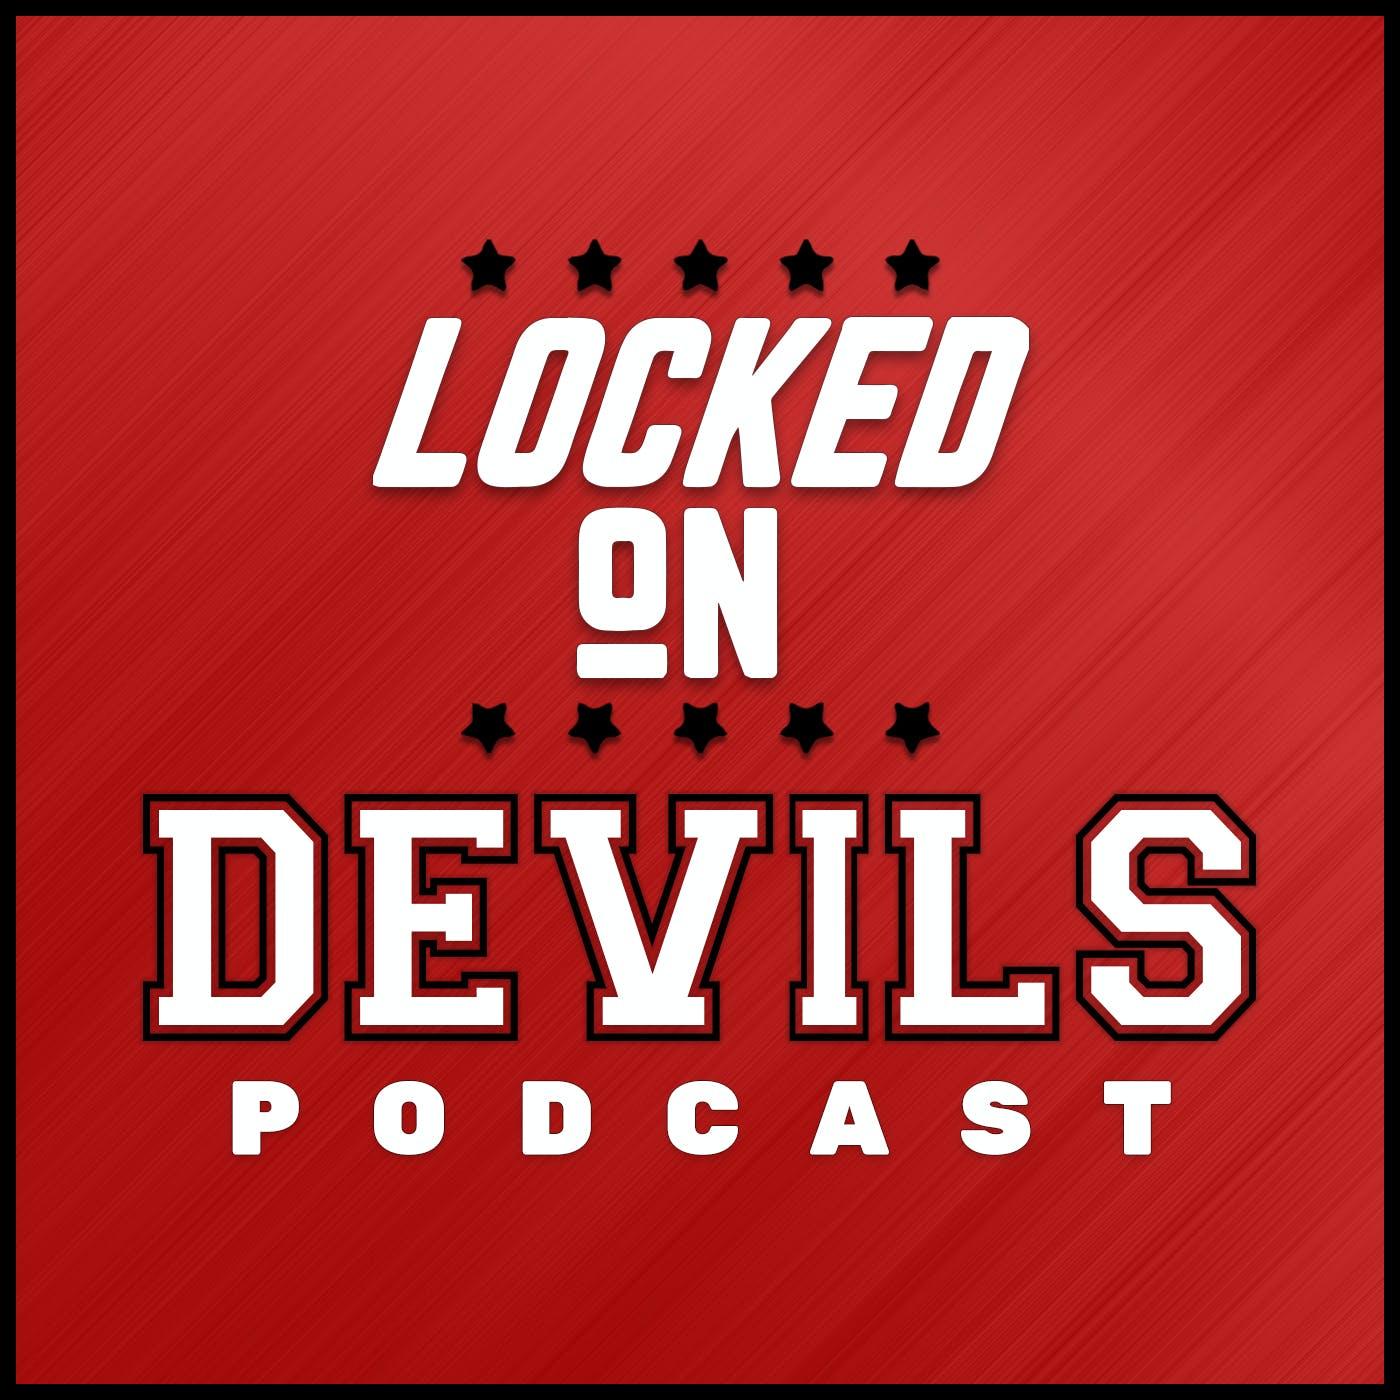 Show poster of Locked On Devils - Daily Podcast On The New Jersey Devils